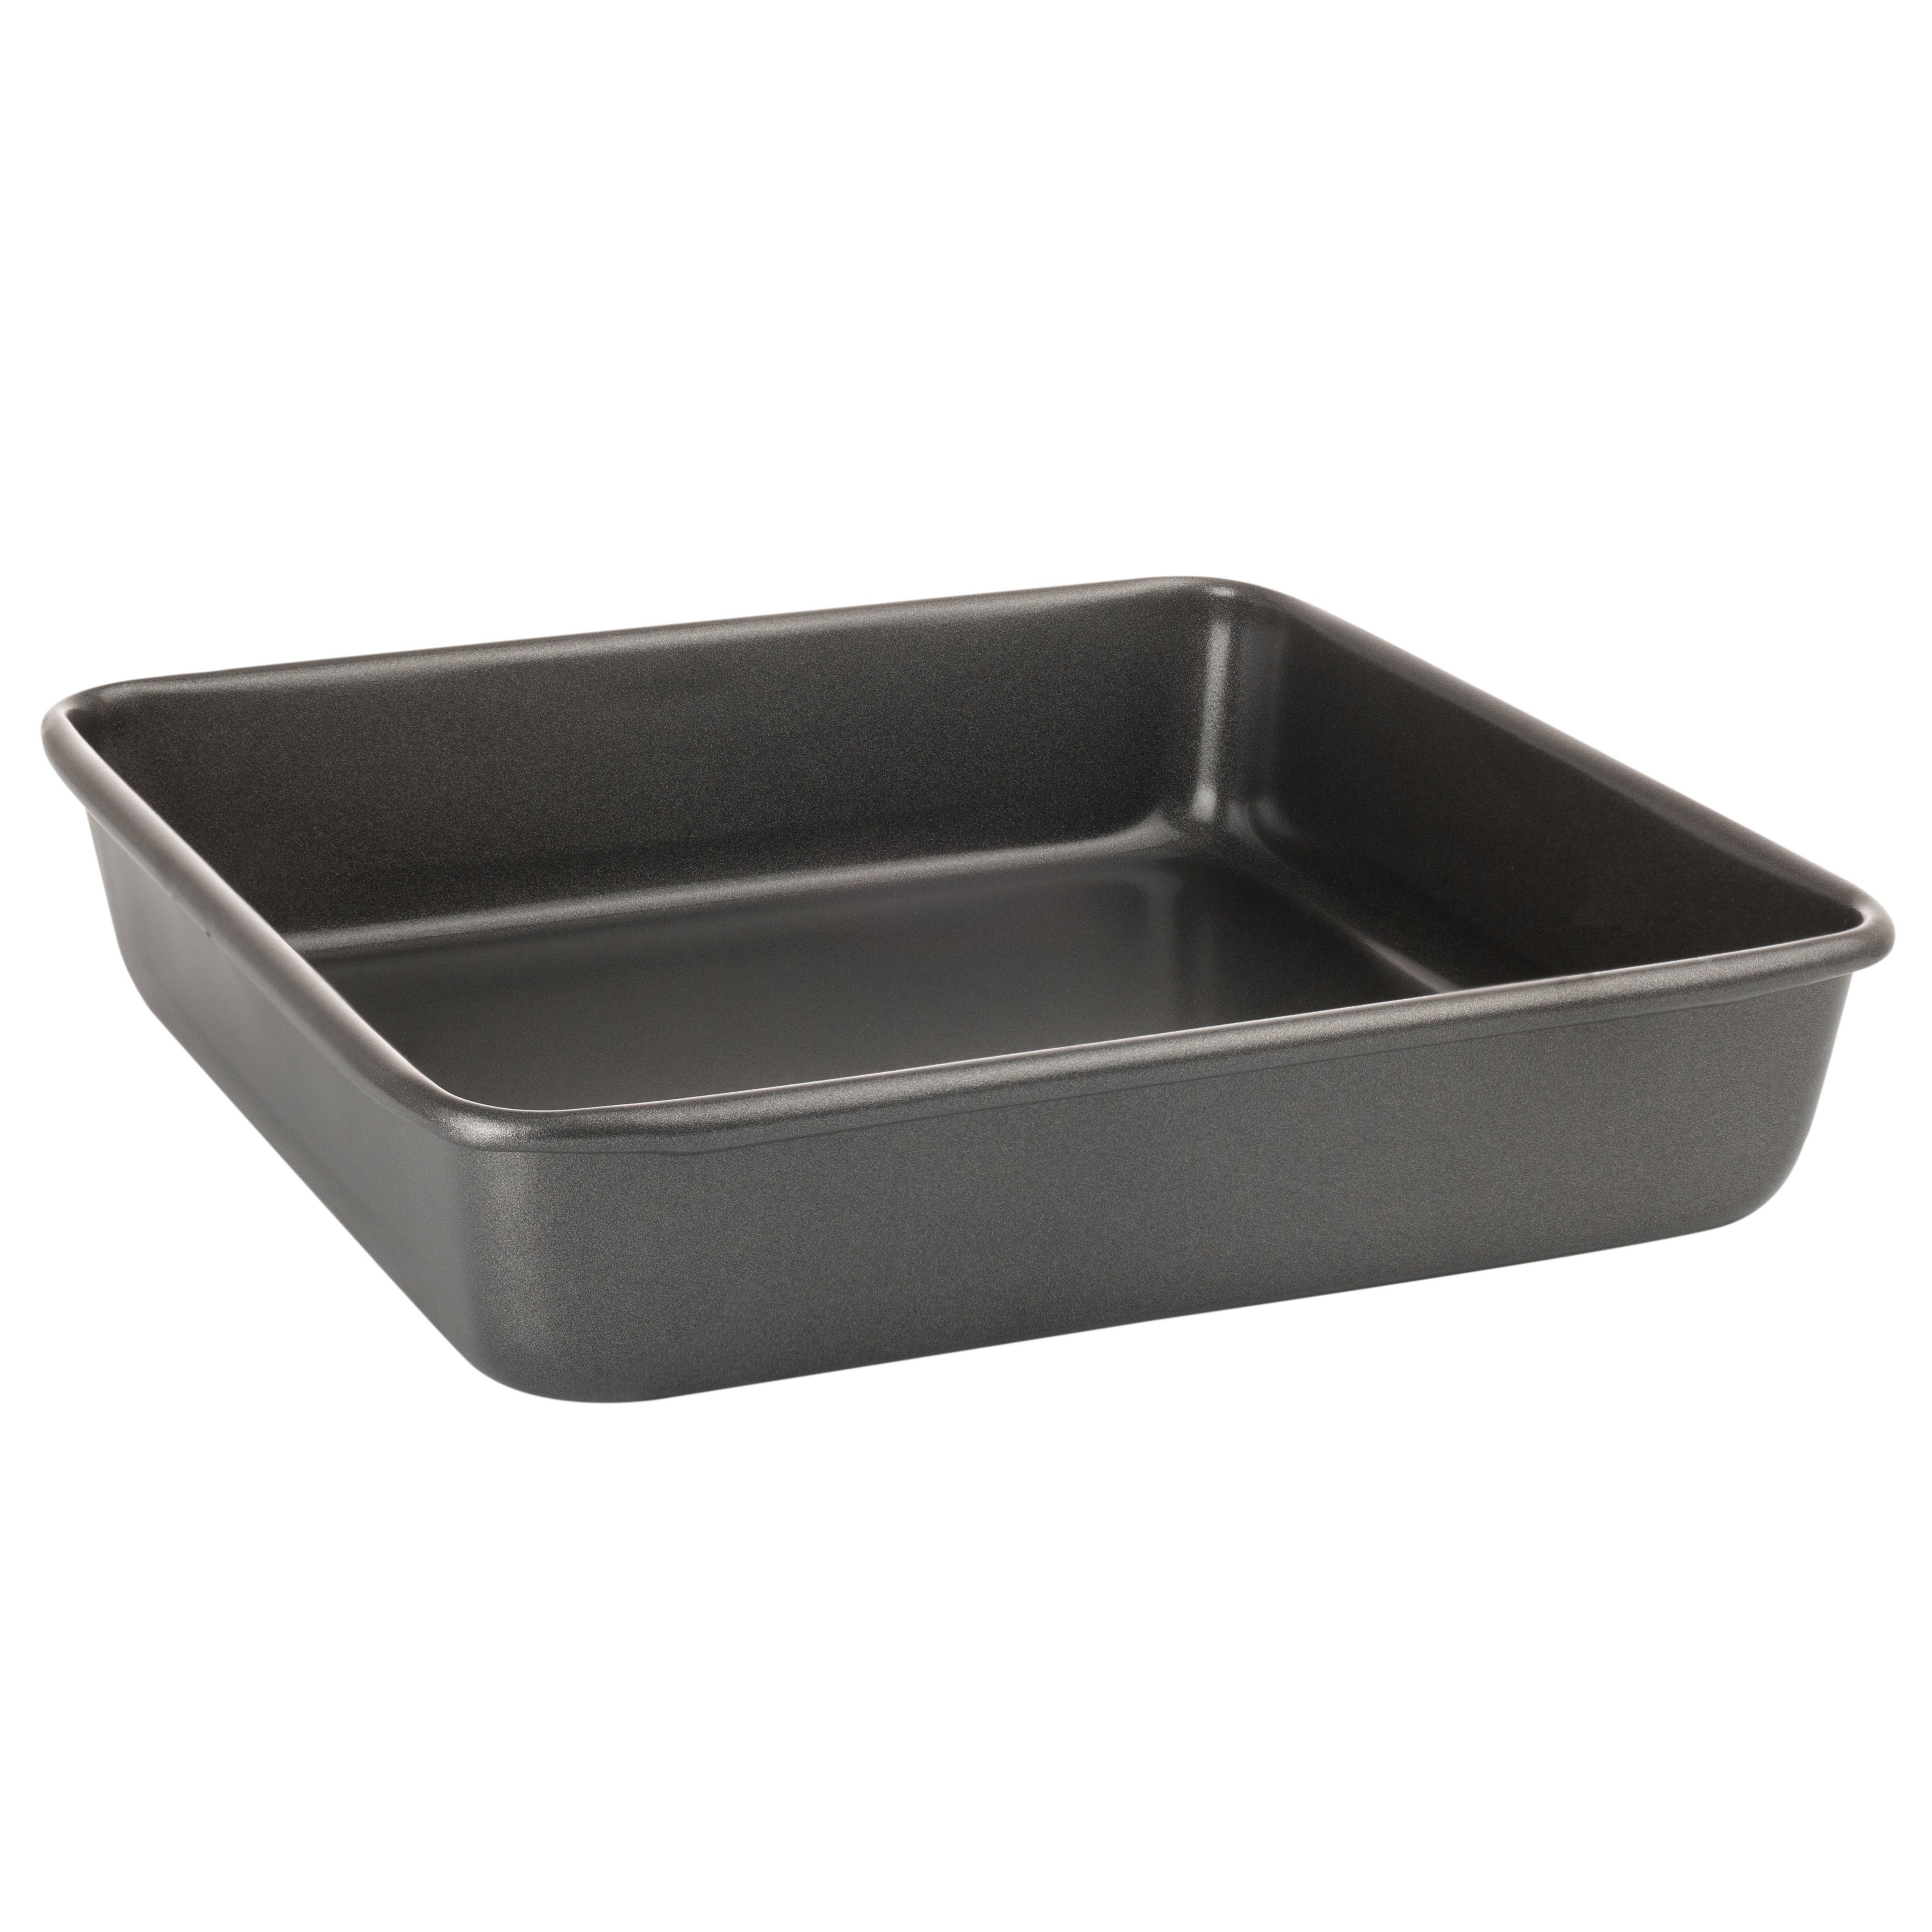 Luxe Kitchen Professional Quality Square Cake Baking Pan 23cm x 5cm (9") - The Cooks Cupboard Ltd